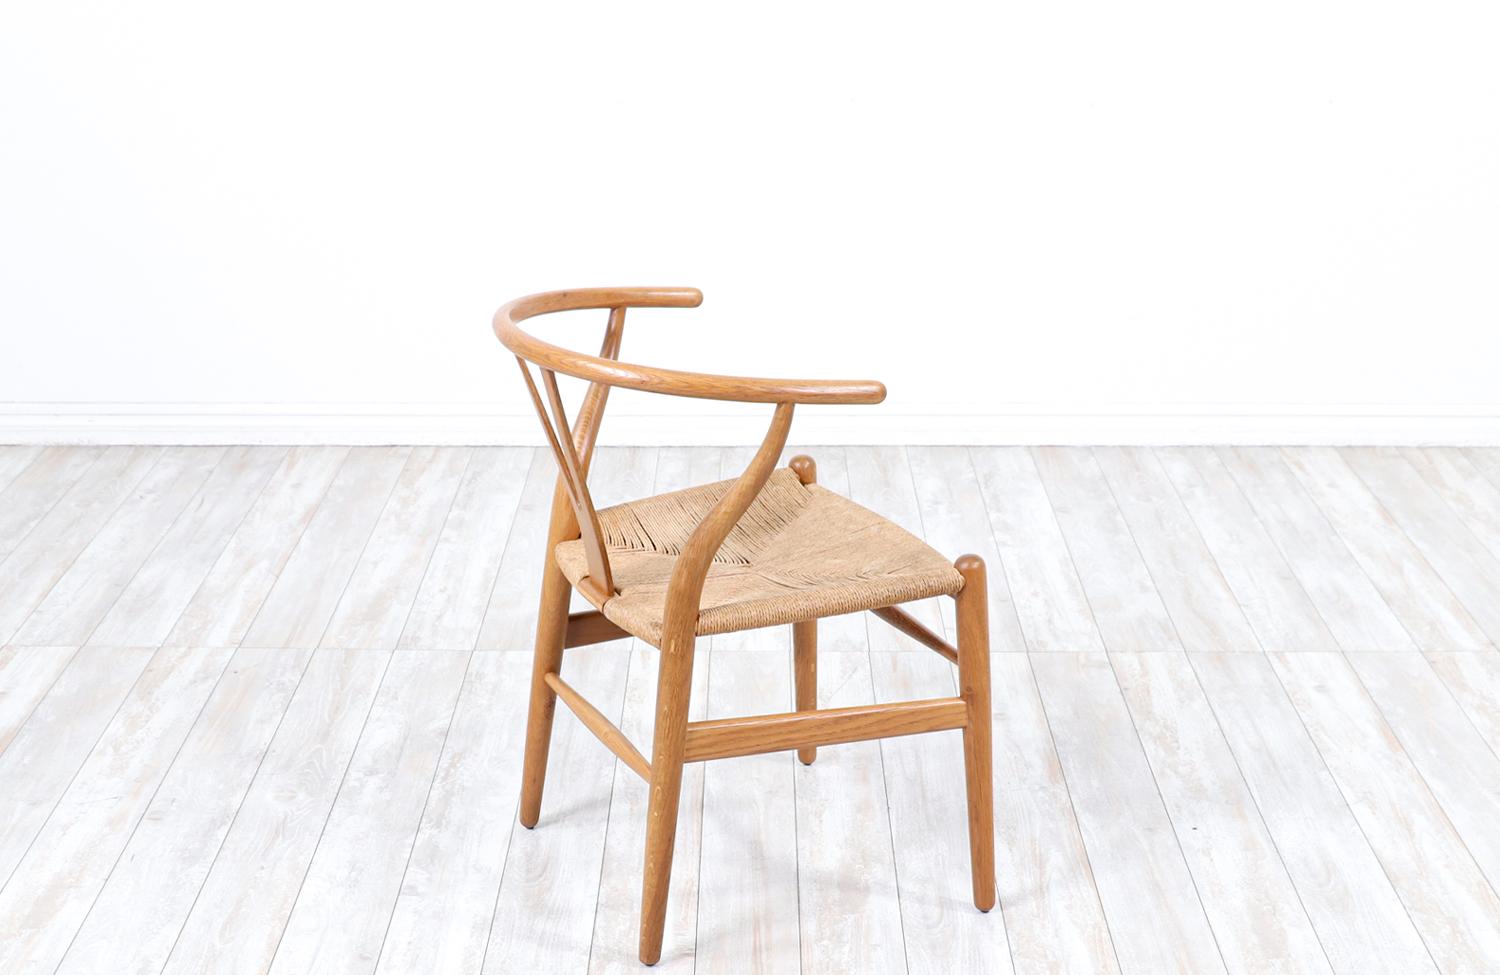 Iconic Hans J. Wegner “Wishbone” Oak Arm Chair for Carl Hansen & Søn In Excellent Condition For Sale In Los Angeles, CA